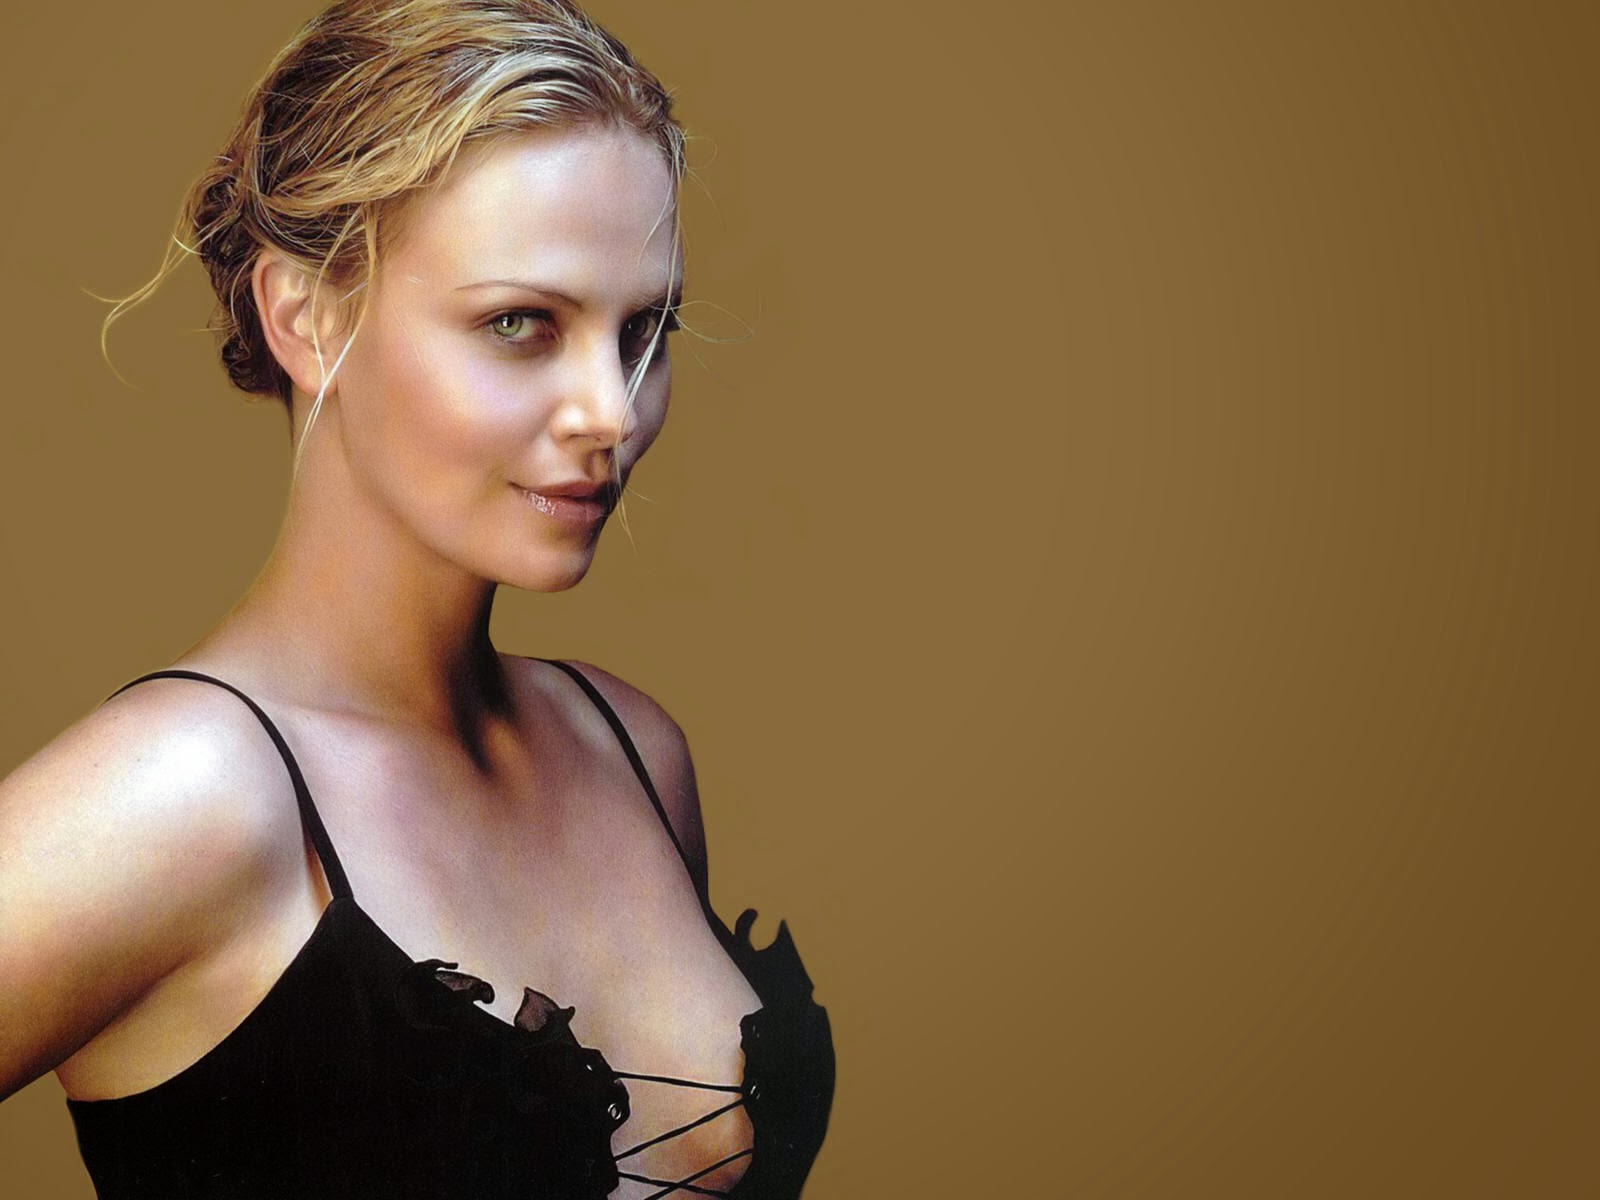 ... Wallpapers Free Download: Charlize Theron Hd Wallpapers Free Download